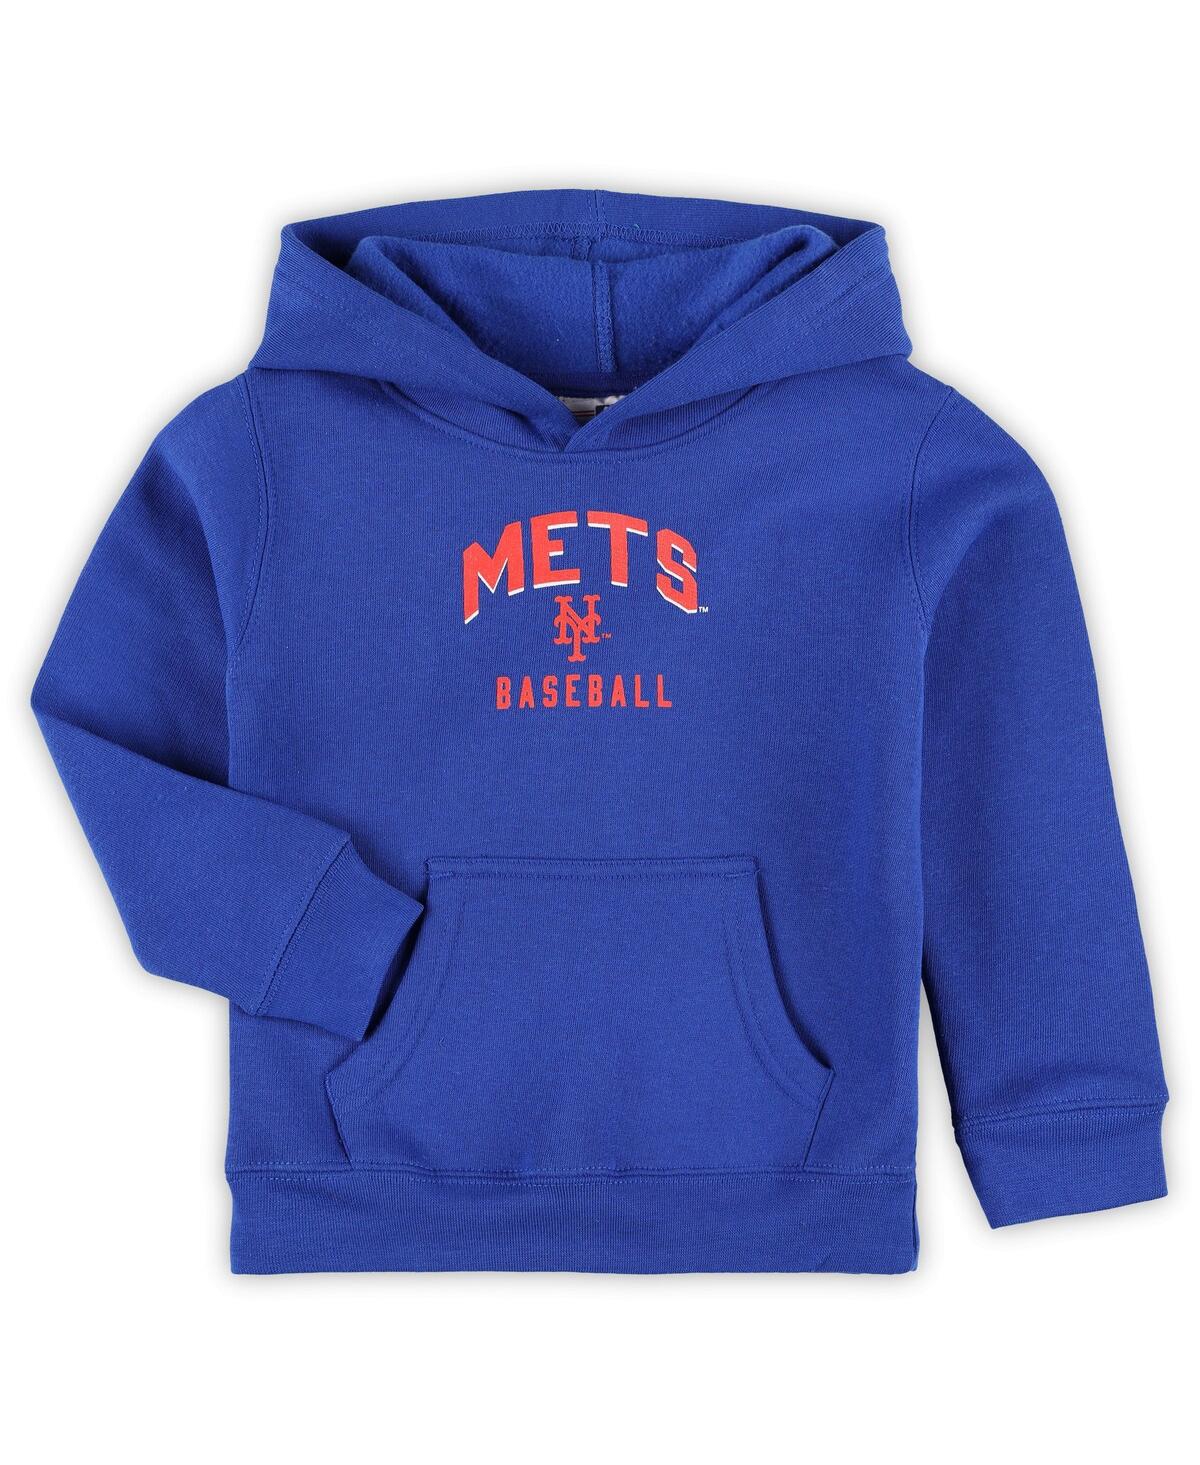 Shop Outerstuff Toddler Boys And Girls Royal, Gray New York Mets Play-by-play Pullover Fleece Hoodie And Pants Set In Royal,gray